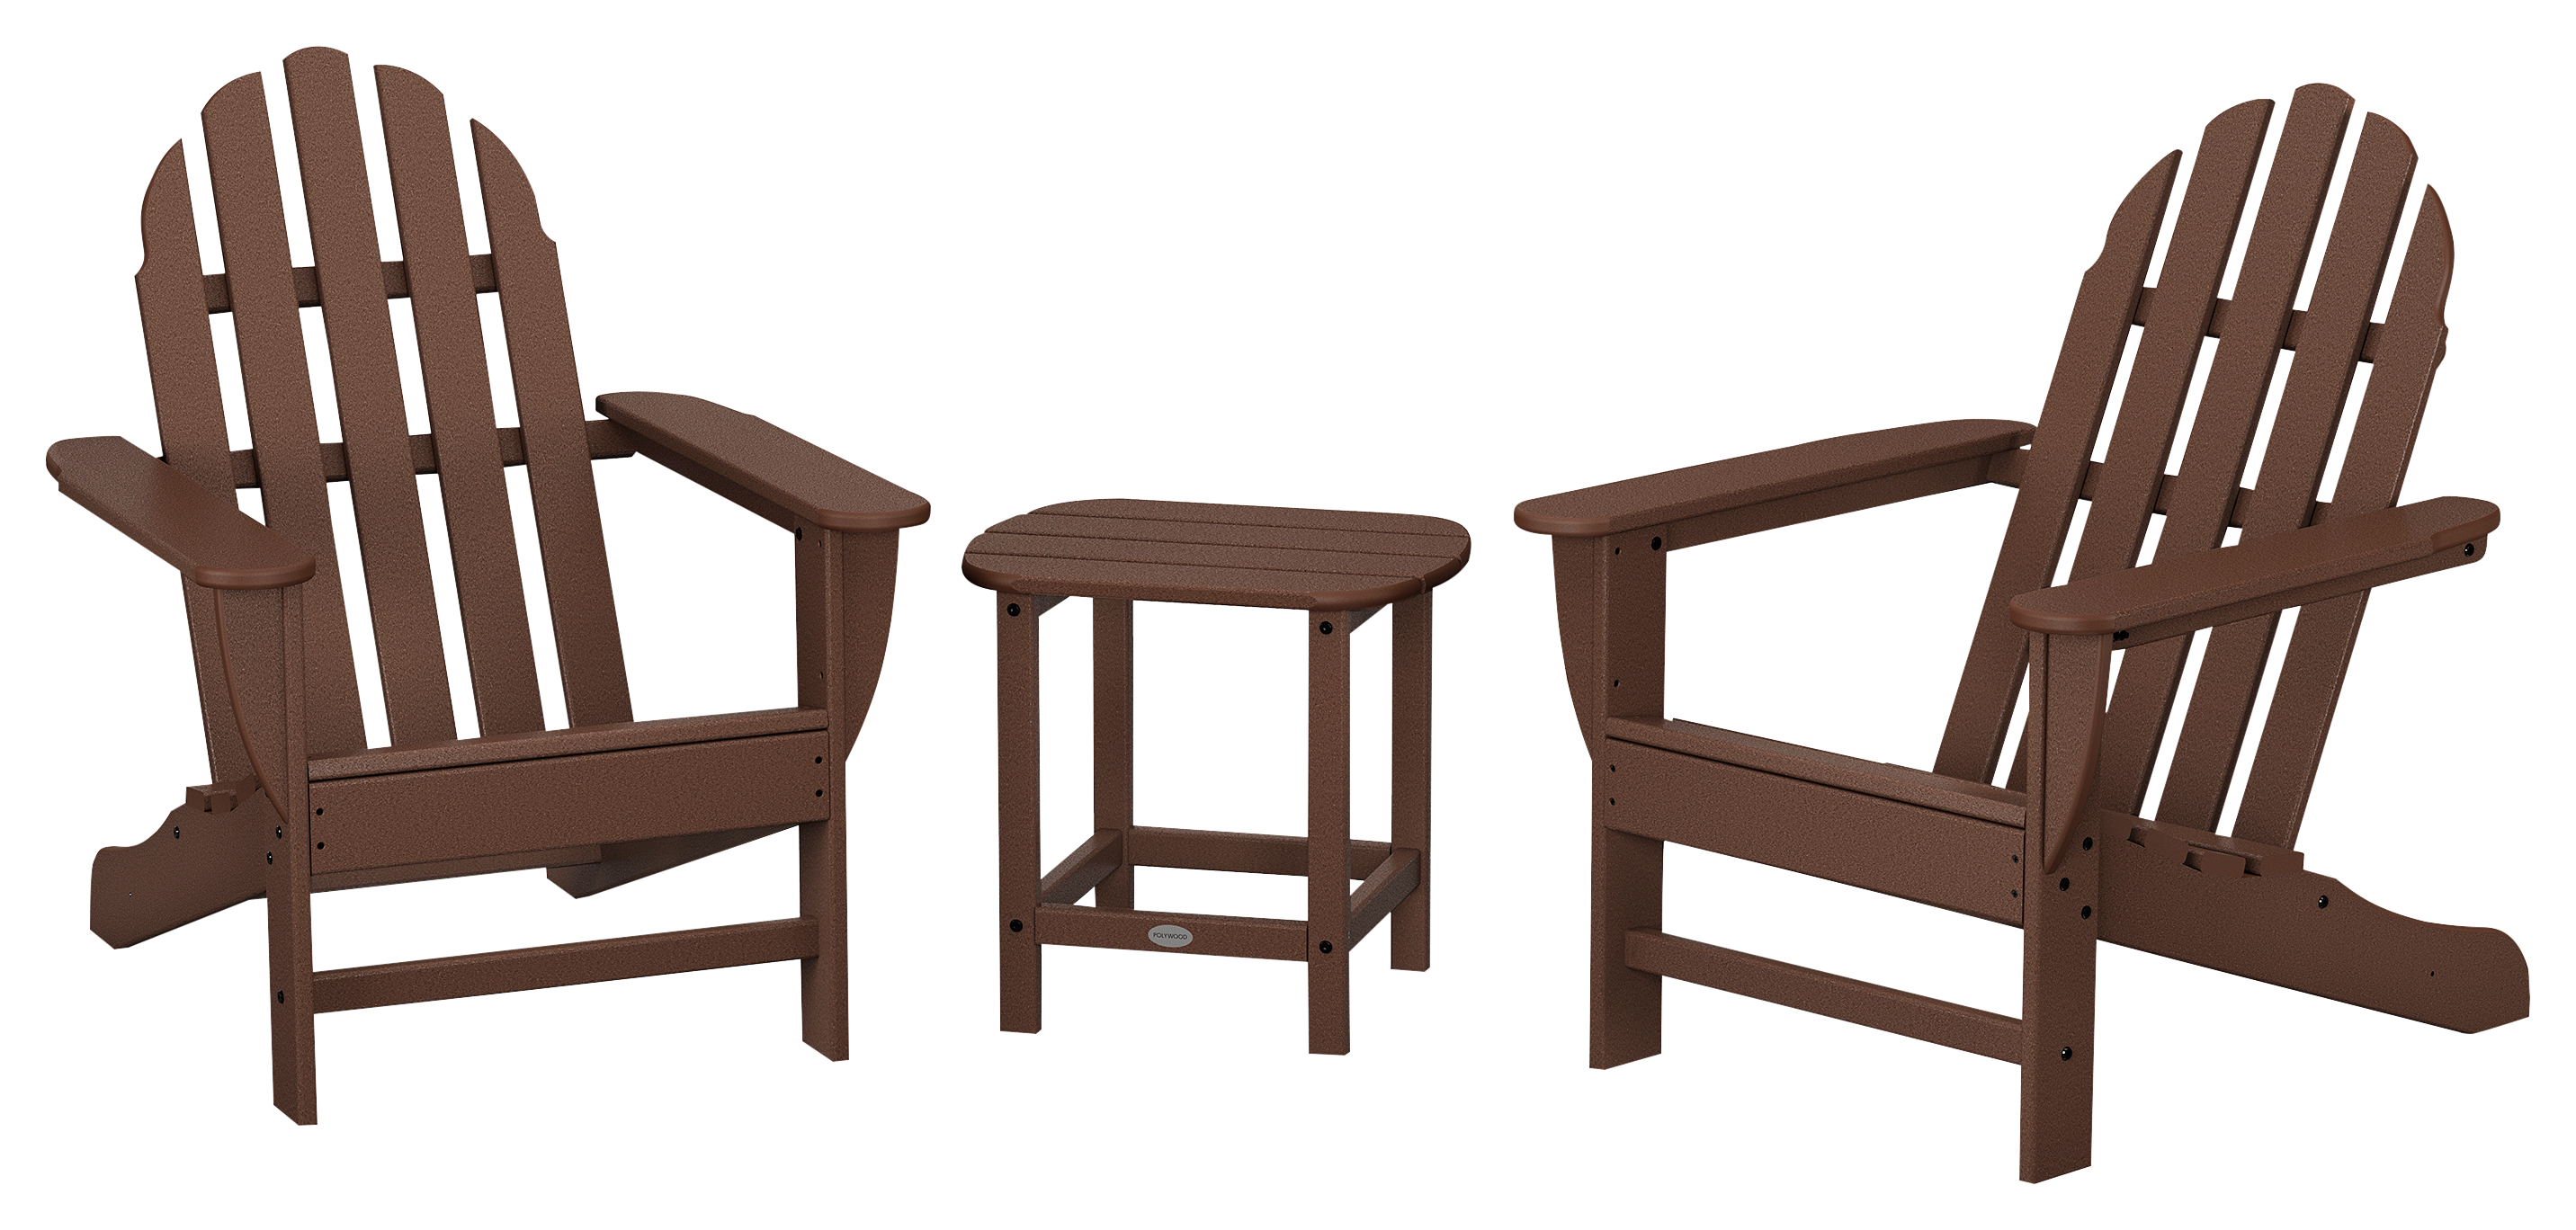 POLYWOOD Classic Adirondack 3-Piece Set with South Beach Side Table - Mahogany